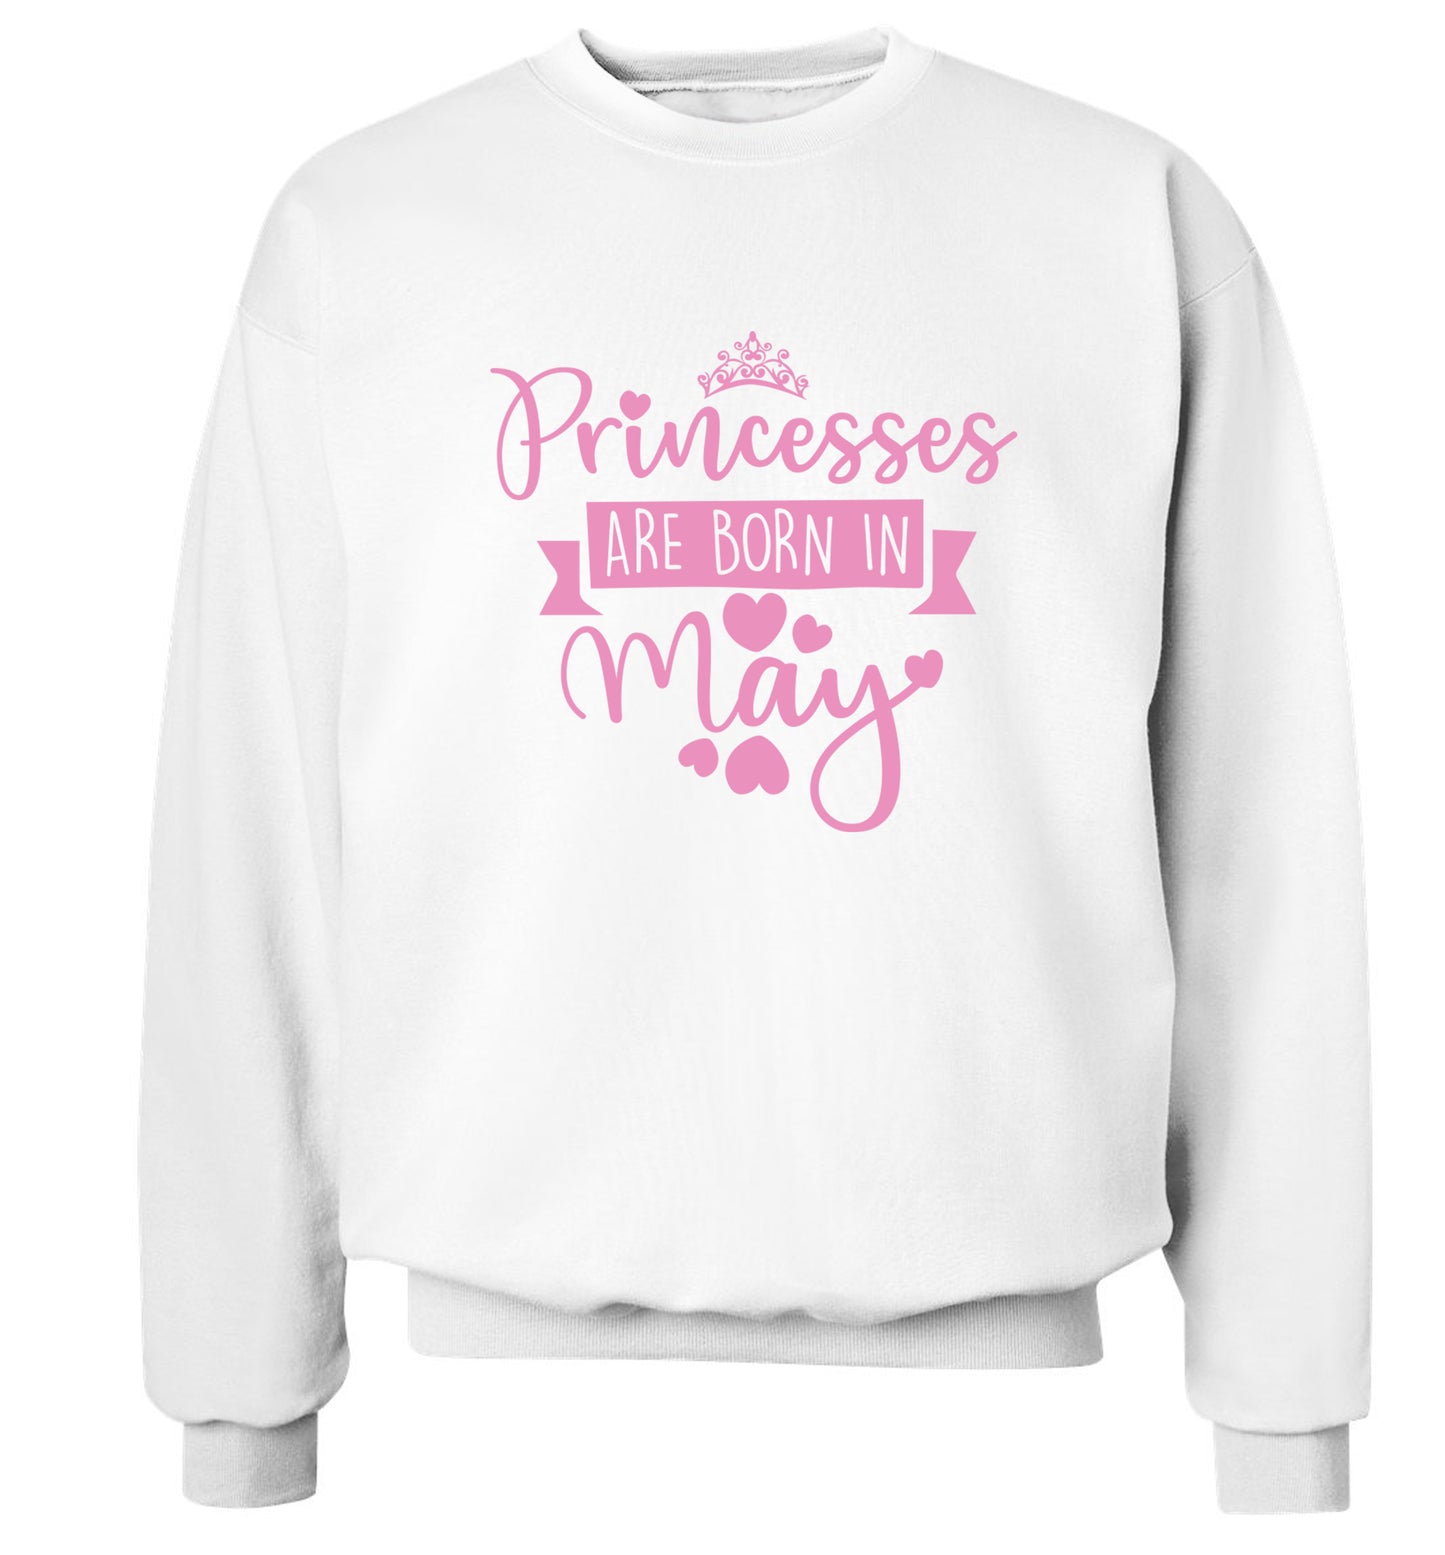 Princesses are born in May Adult's unisex white Sweater 2XL